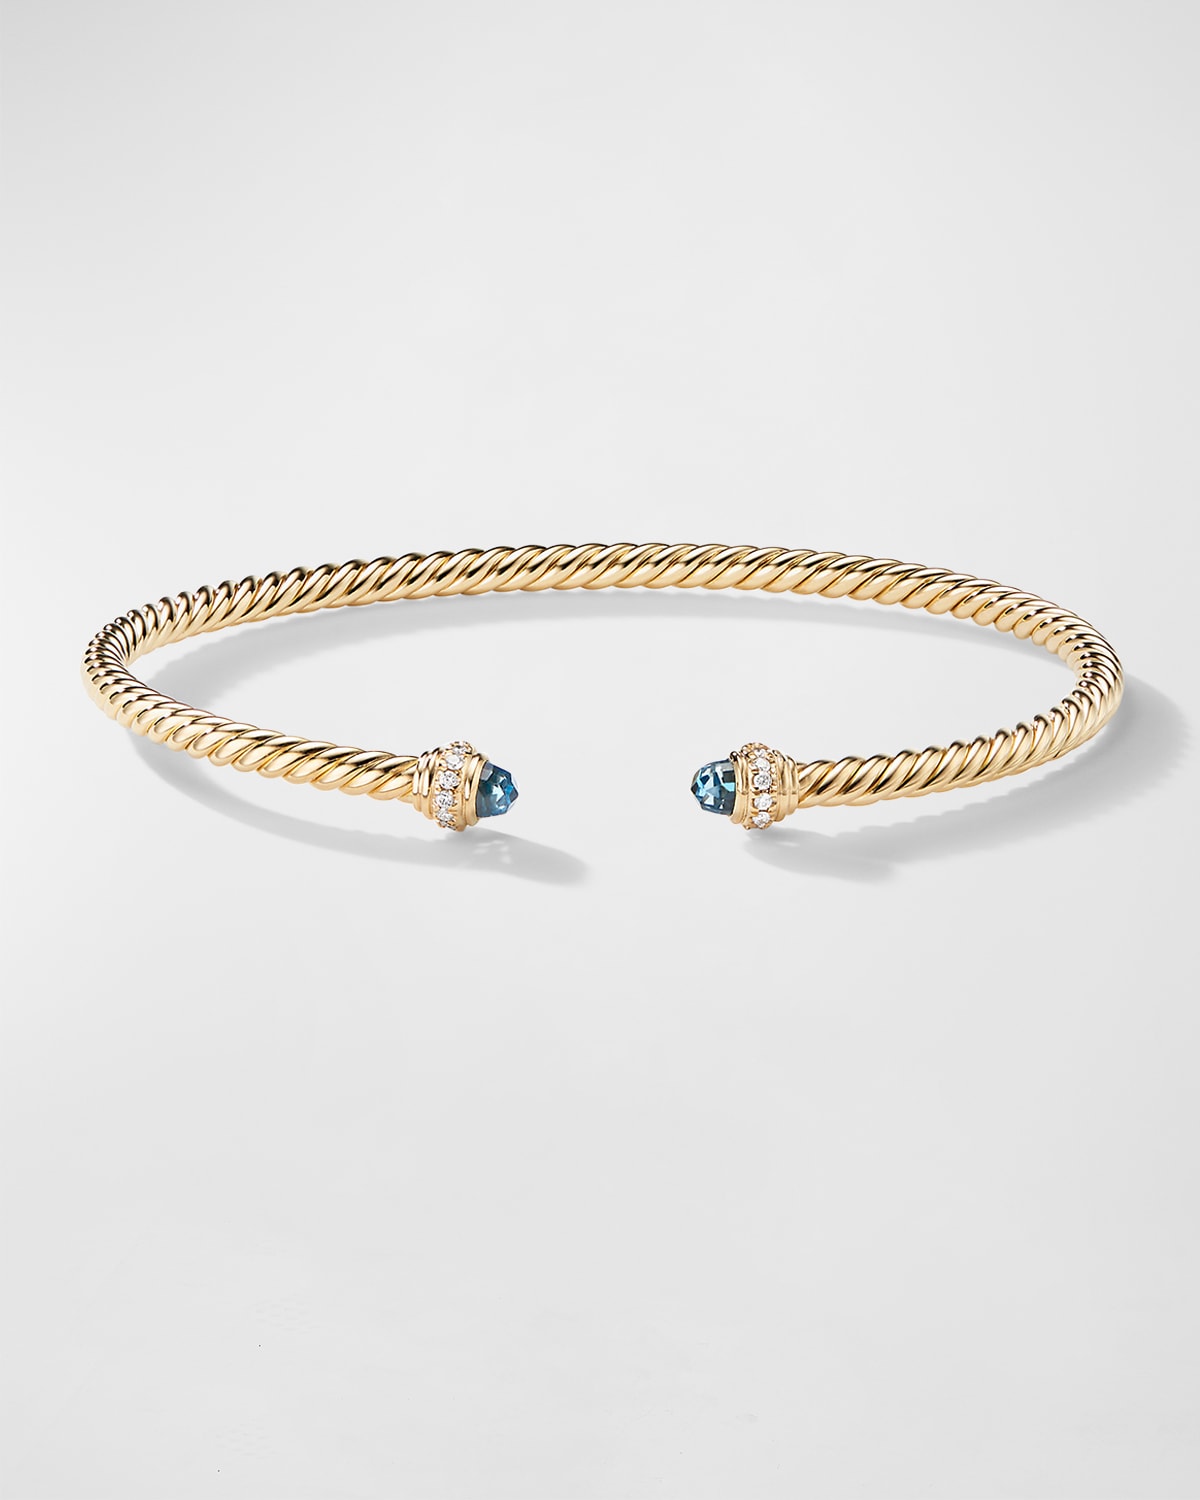 3mm Cablespira Bracelet with Gemstone and Diamonds in 18K Gold